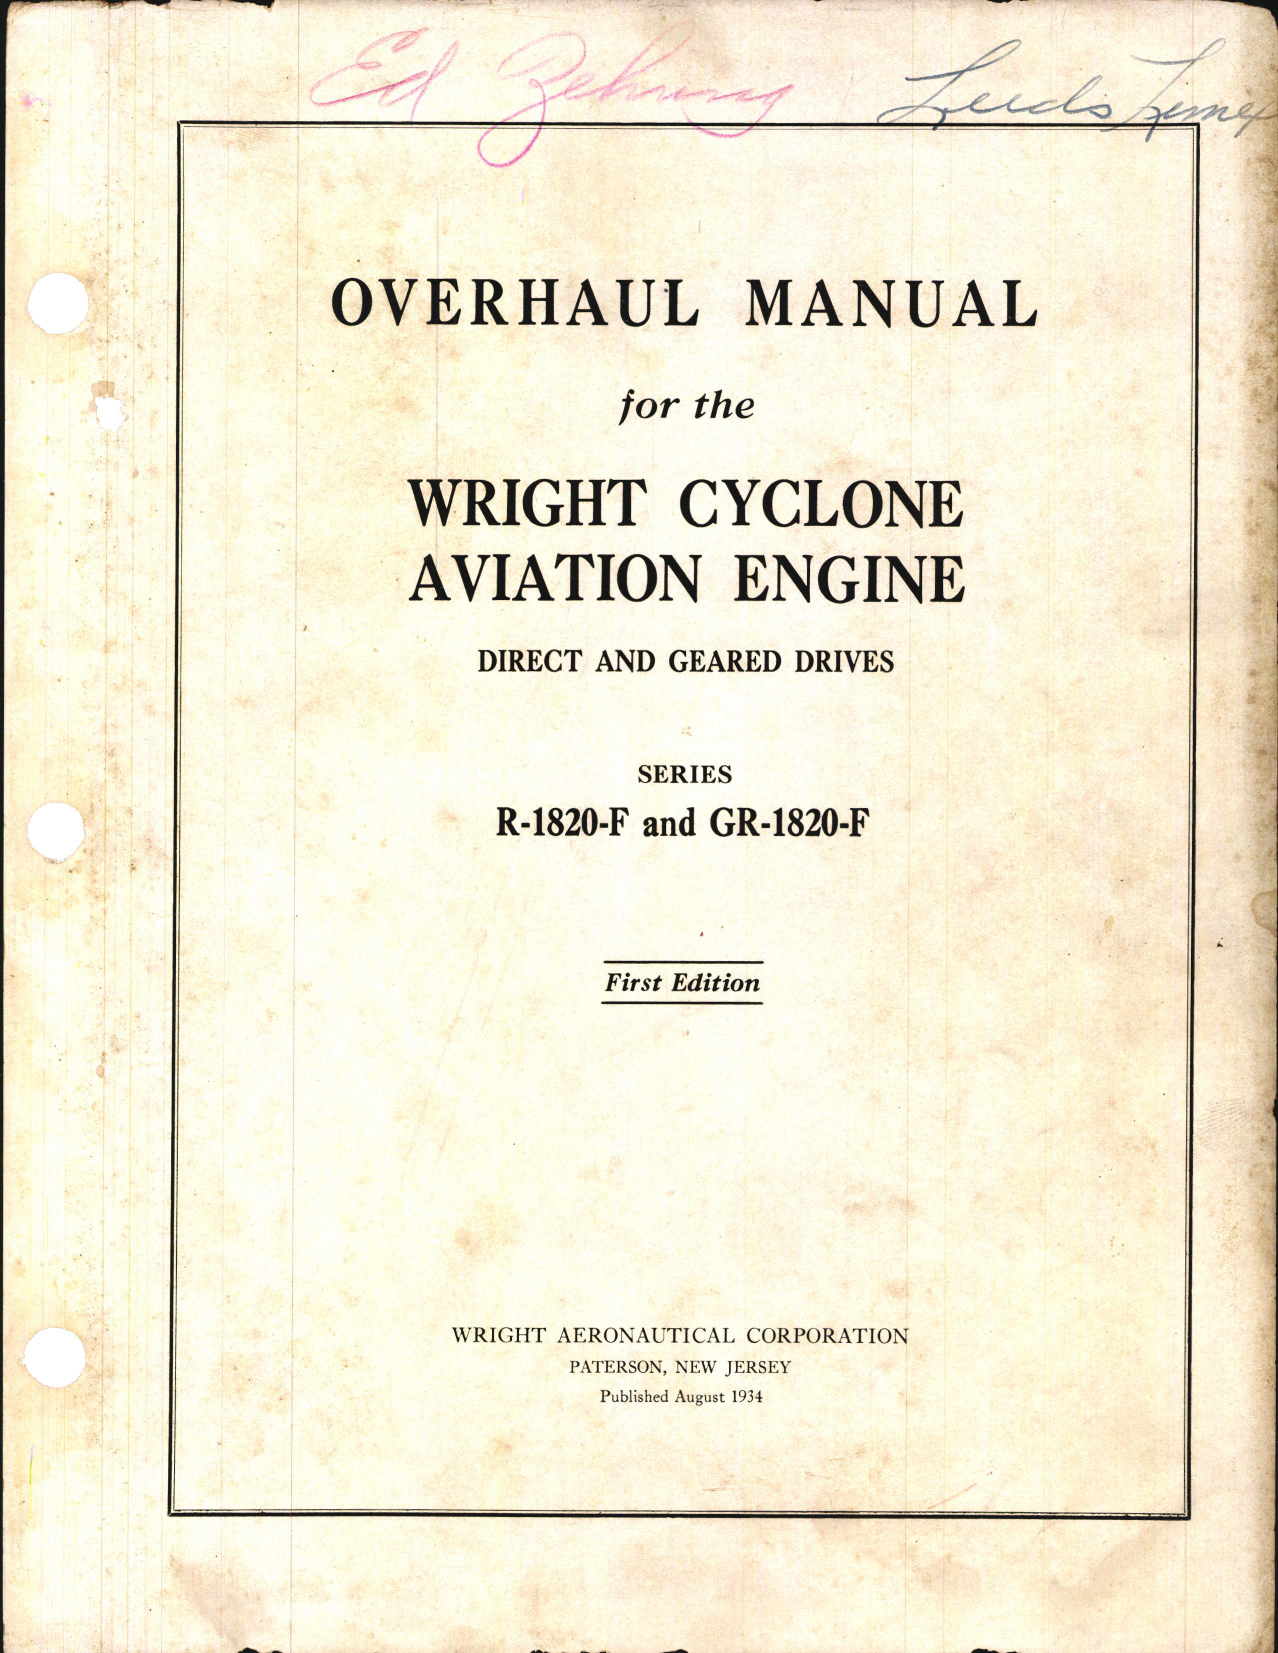 Sample page 1 from AirCorps Library document: Overhaul Manual of the Wright Cyclone Engine R-1820-F and GR-1820-F